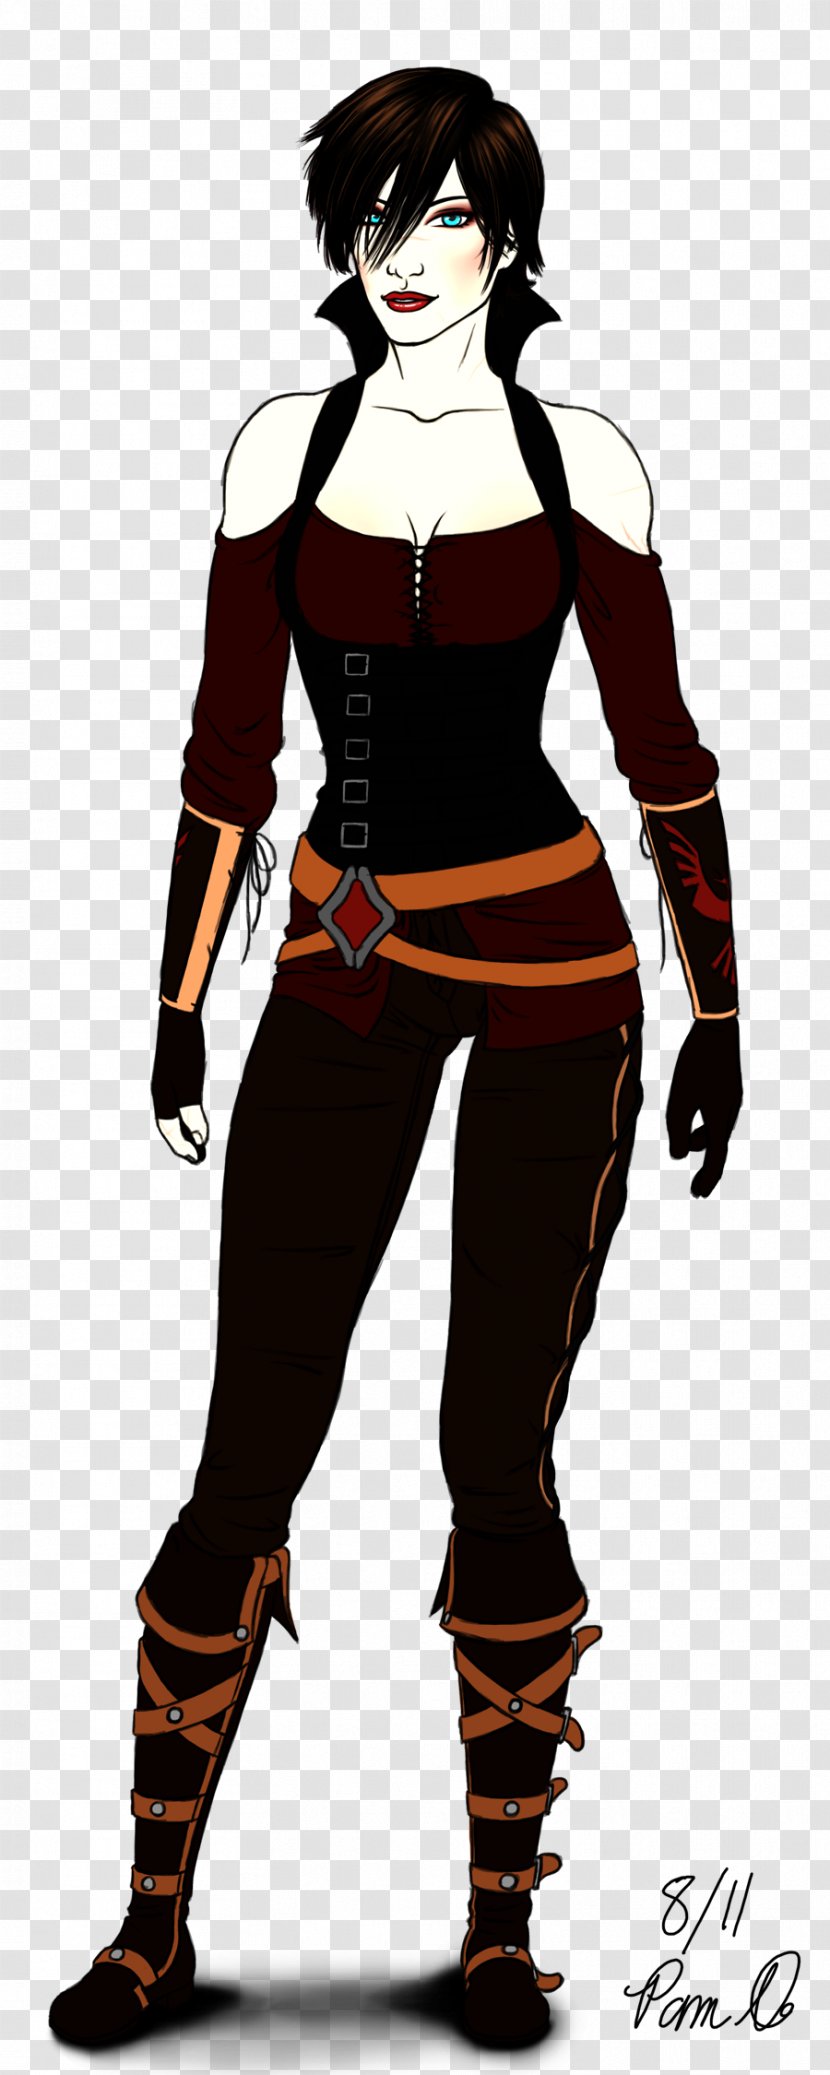 Dragon Age II Drawing Thief Medieval Fantasy BioWare - Human - Clothes Transparent PNG